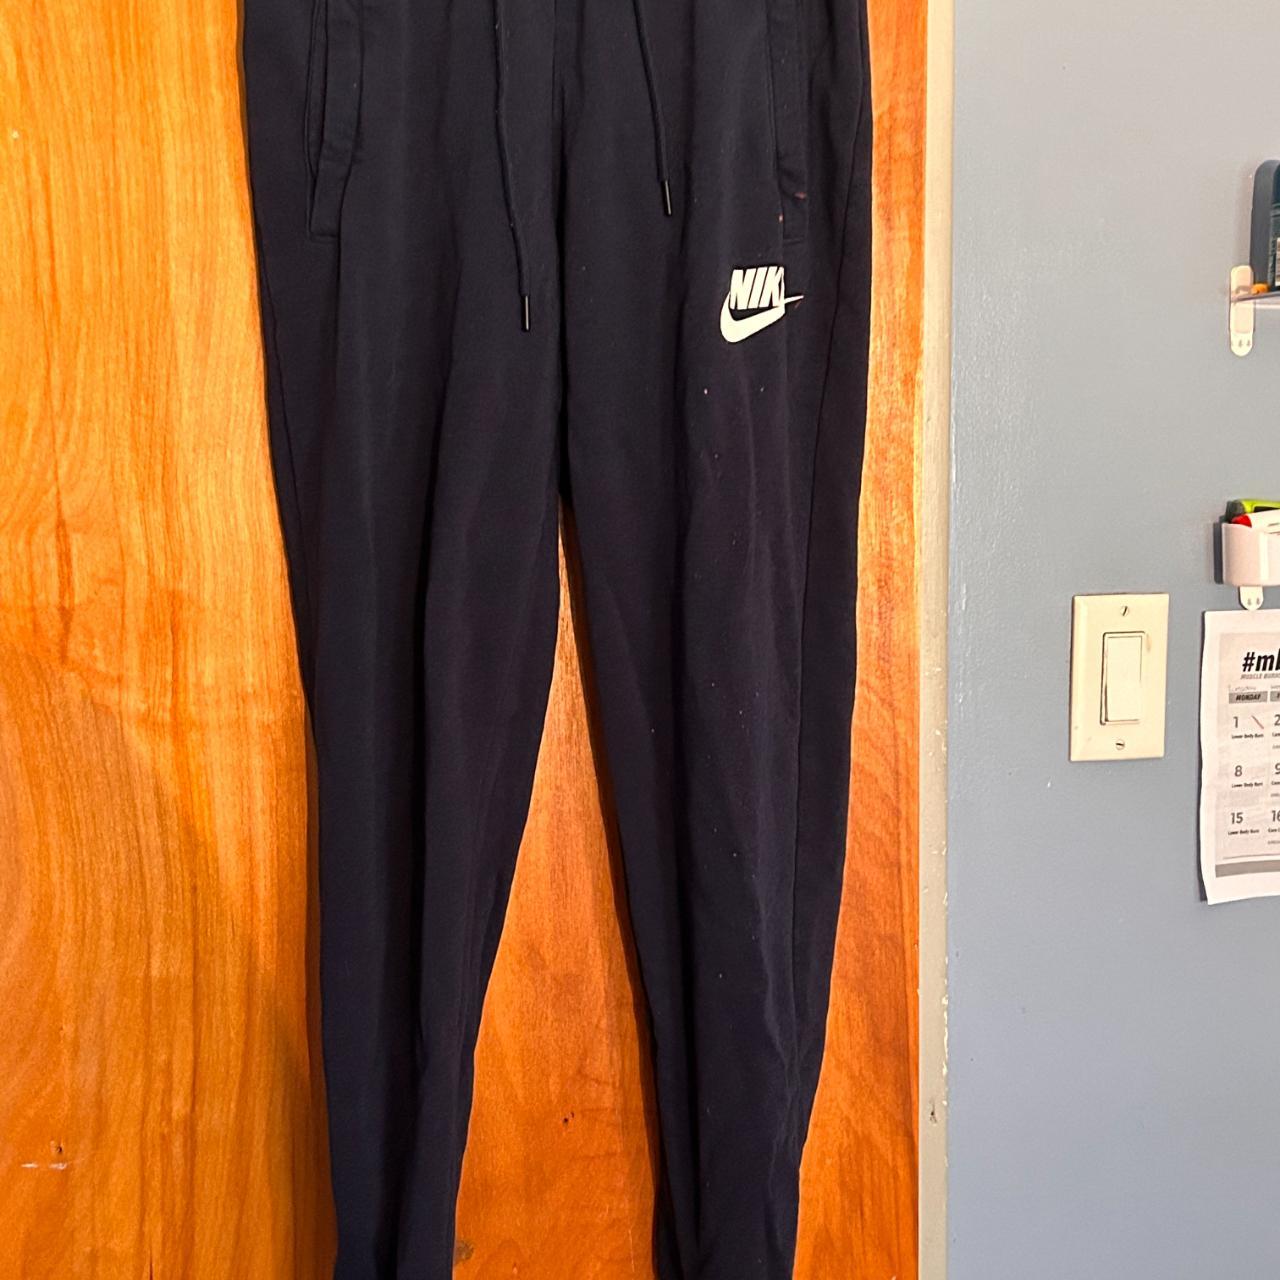 Small Nike Sweatpants They do have a small - Depop